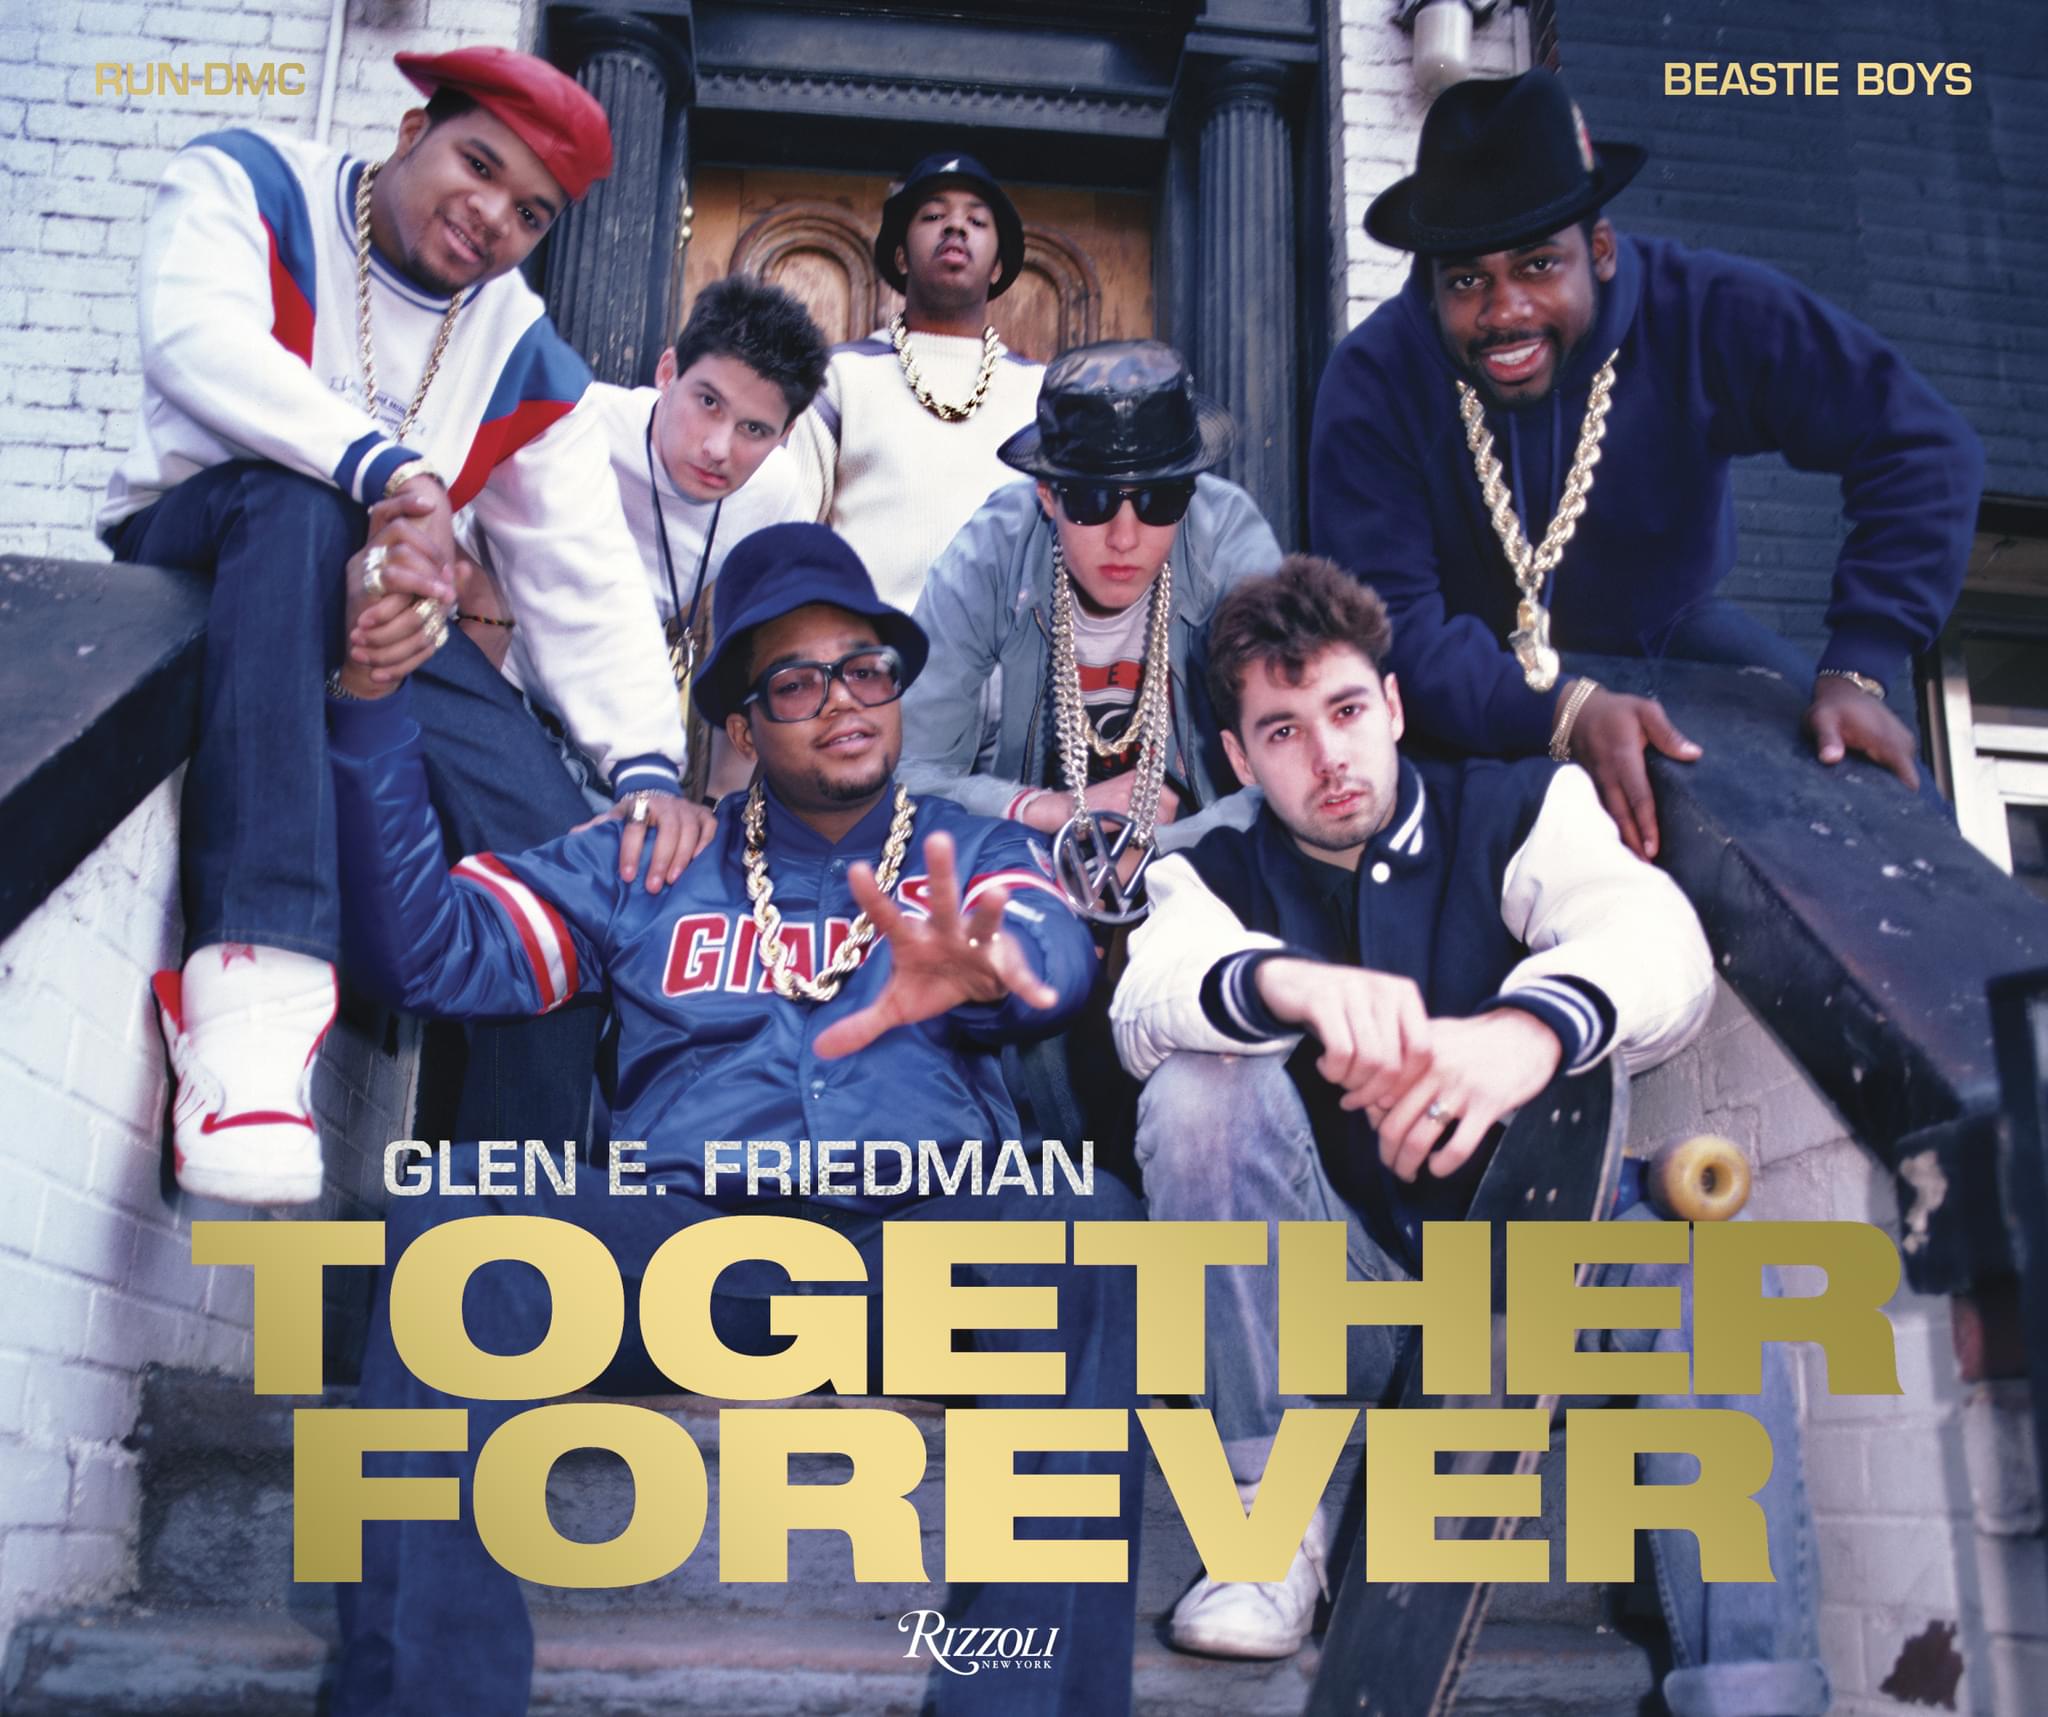 TOGETHER FOREVER: Run-DMC and Beastie Boys [BOOK]